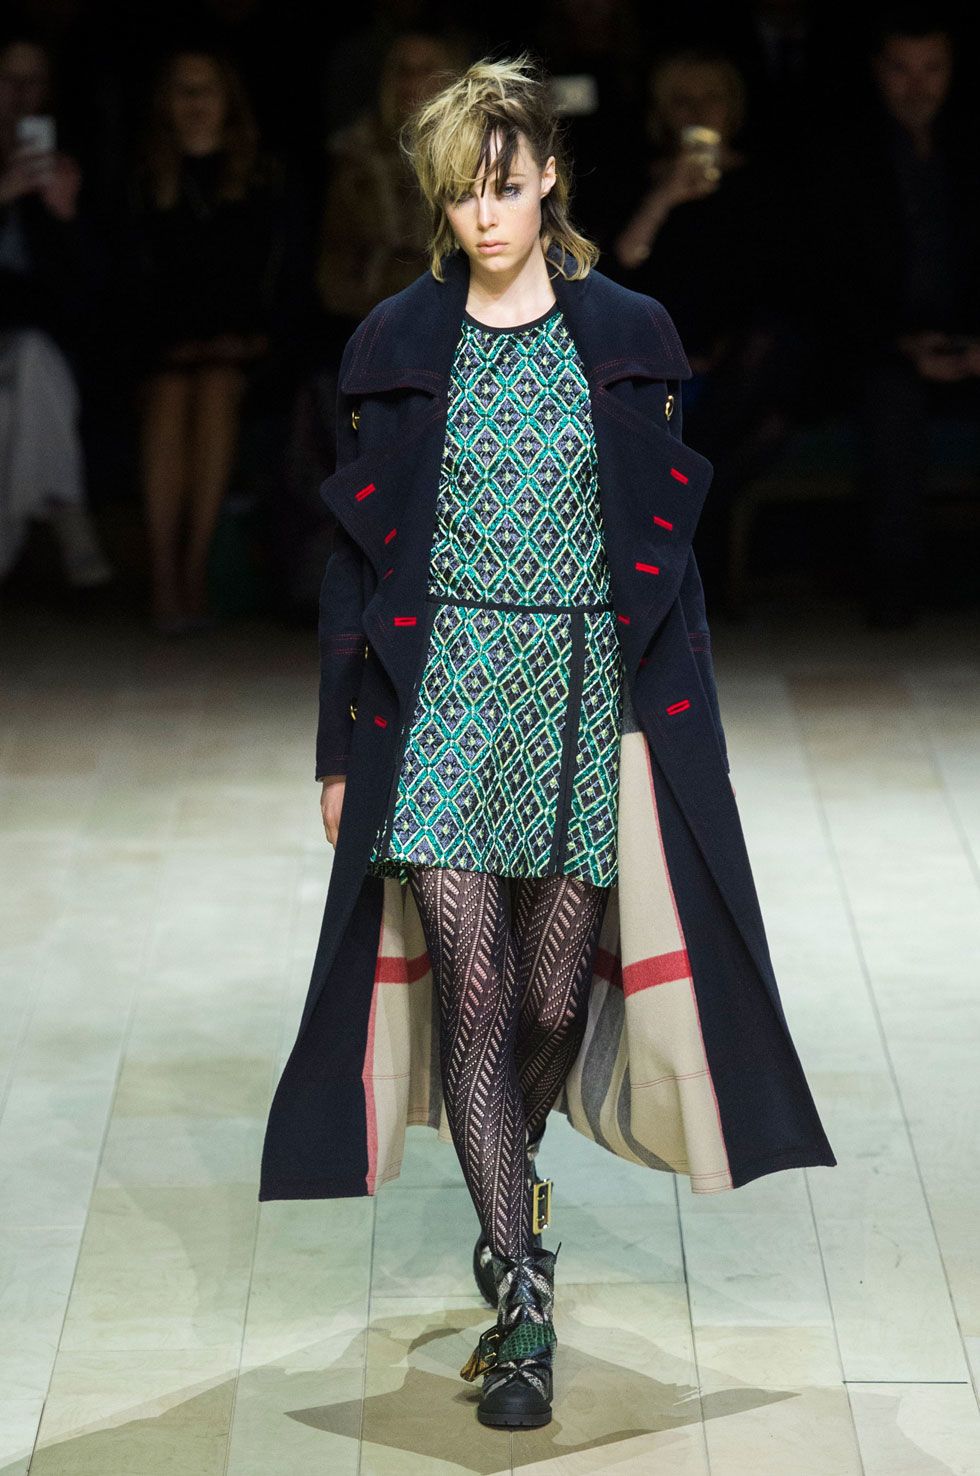 Burberry Fall 2016 Ready-to-Wear Show